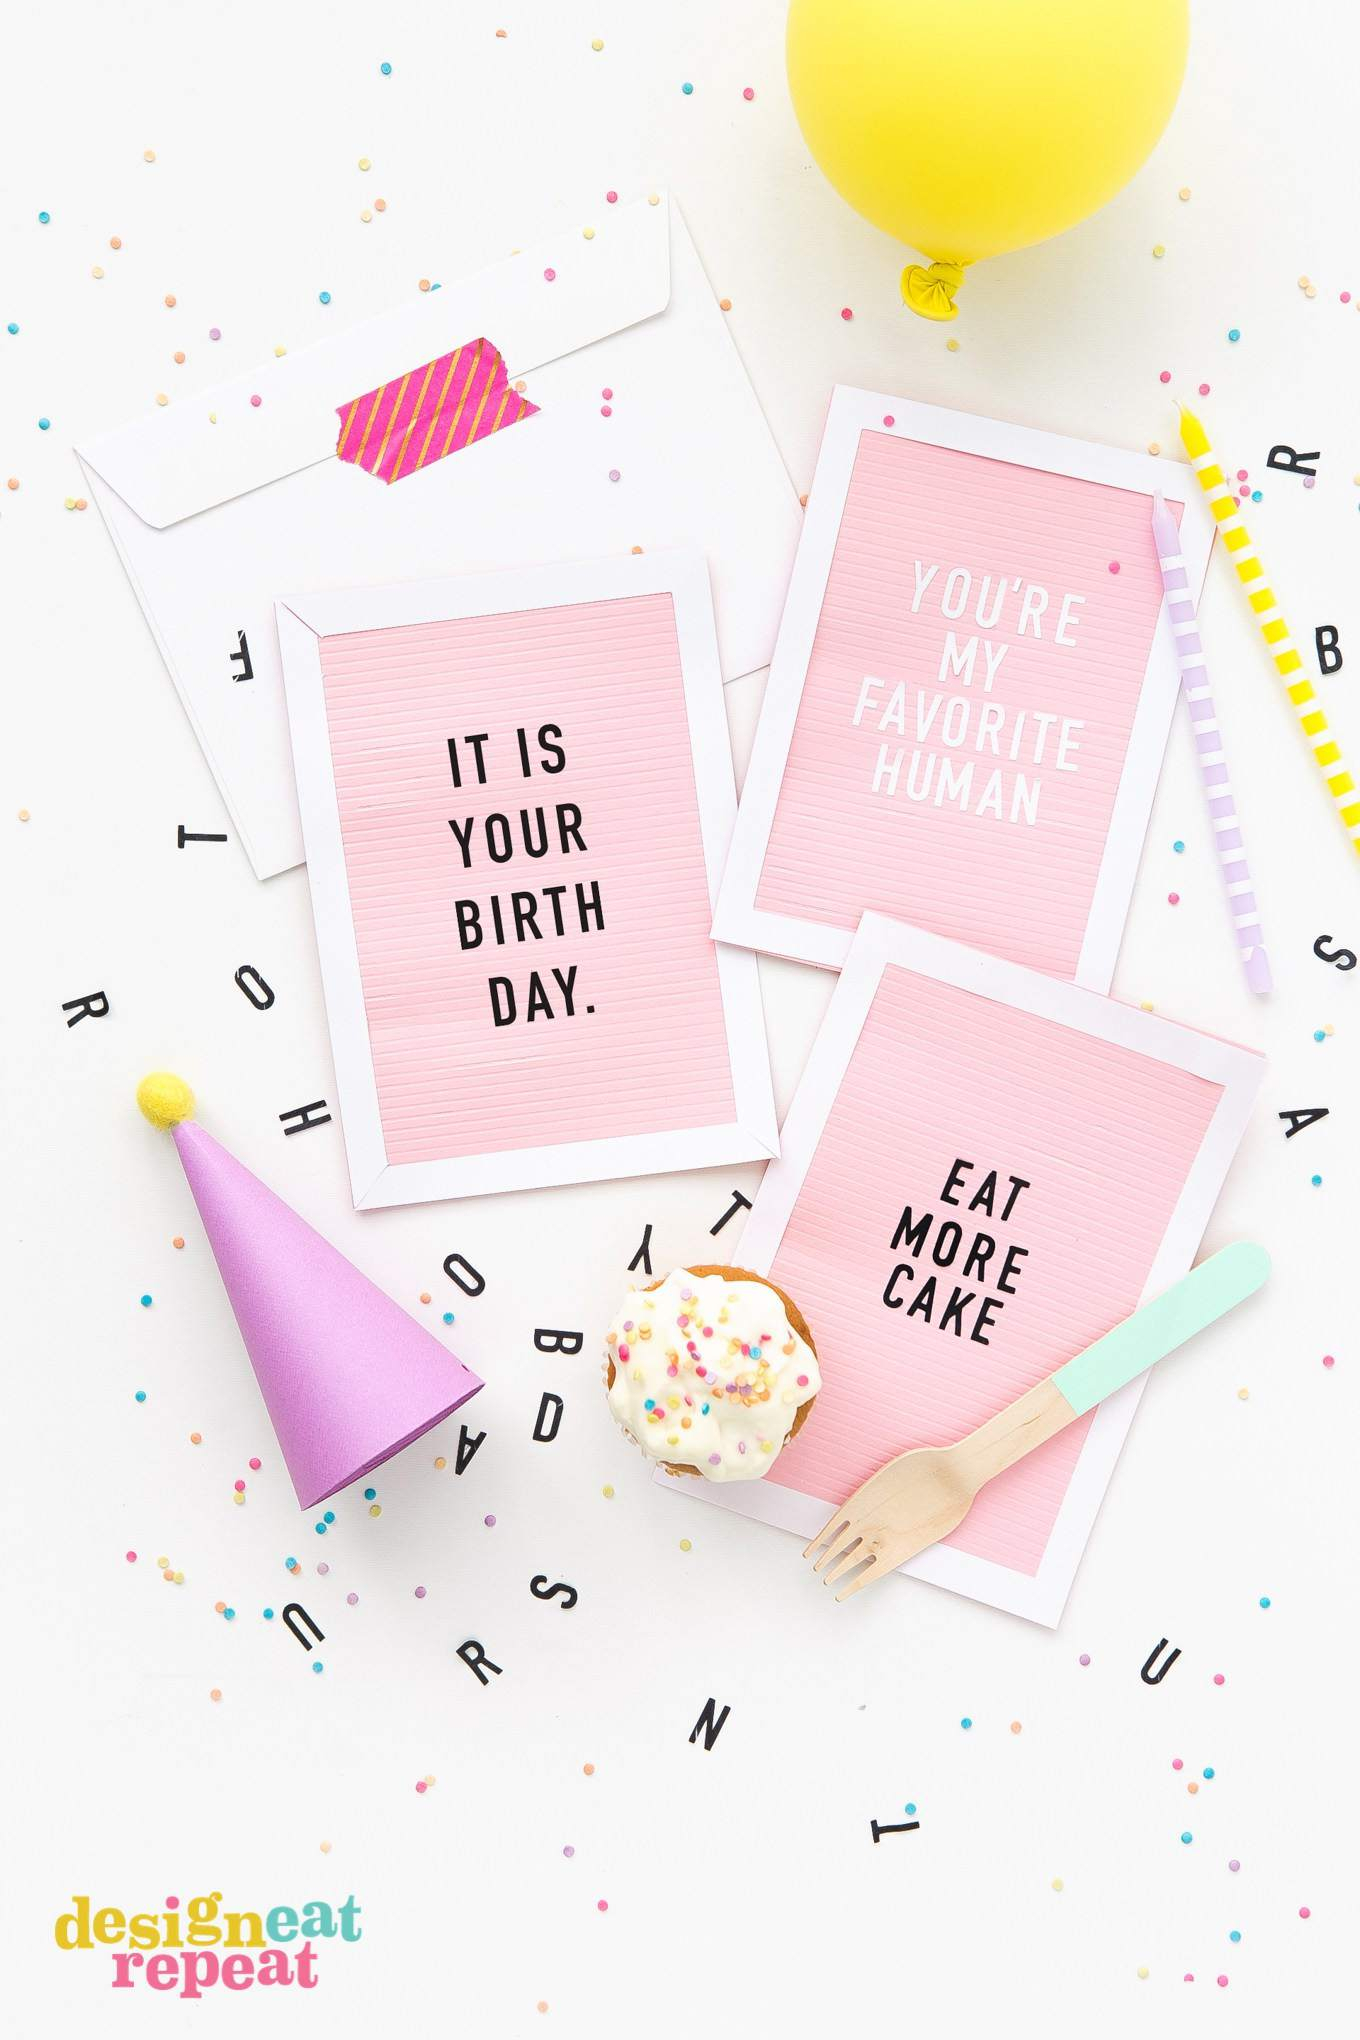 Creative Birthday Card Ideas For Girlfriend Get Inspiration From 25 Of The Best Diy Birthday Cards